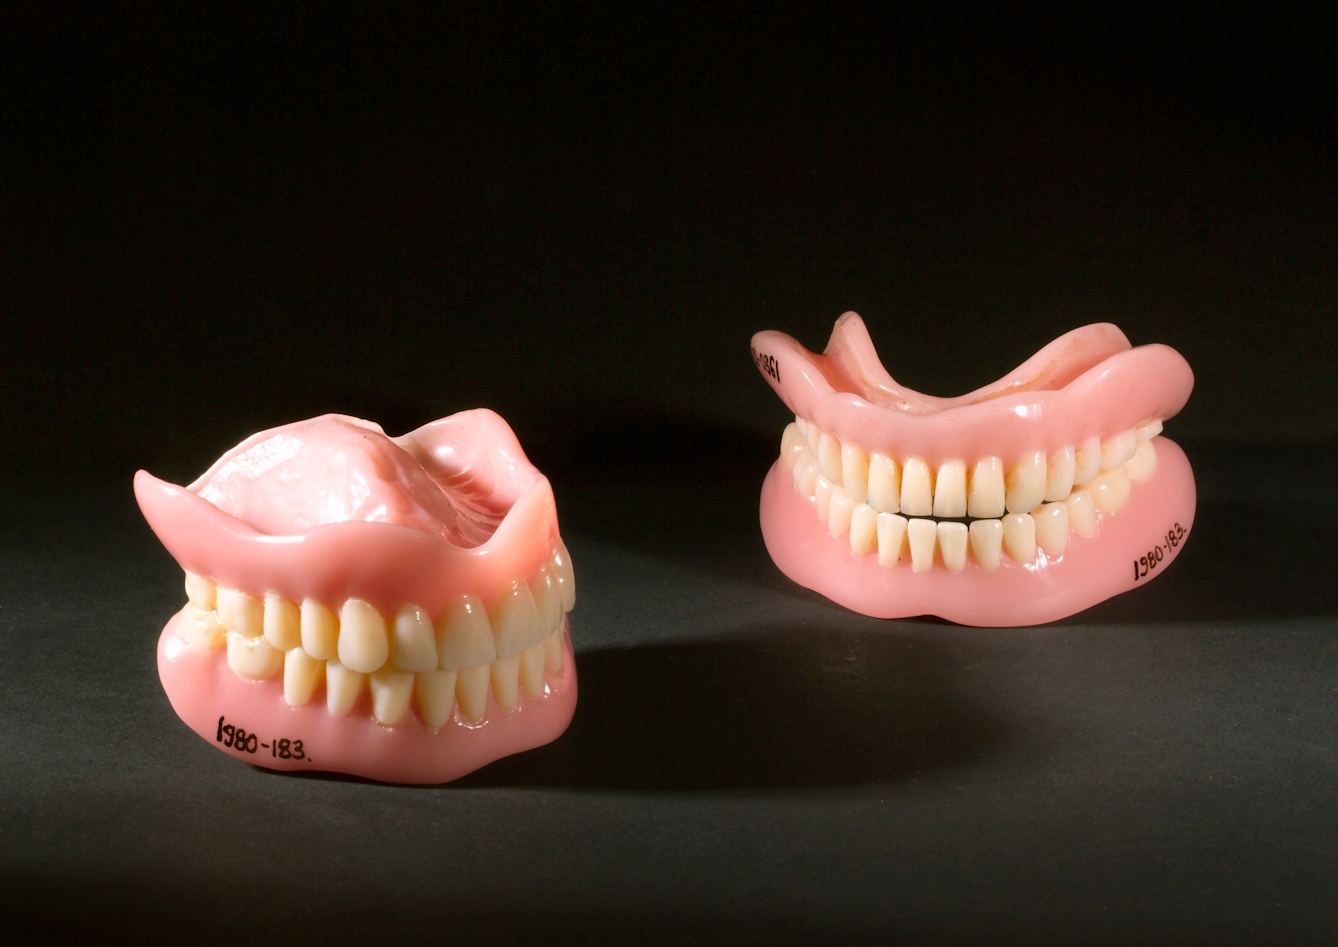 Two pairs of acrylic dentures with top and bottom teeth. Photographed on a black background.